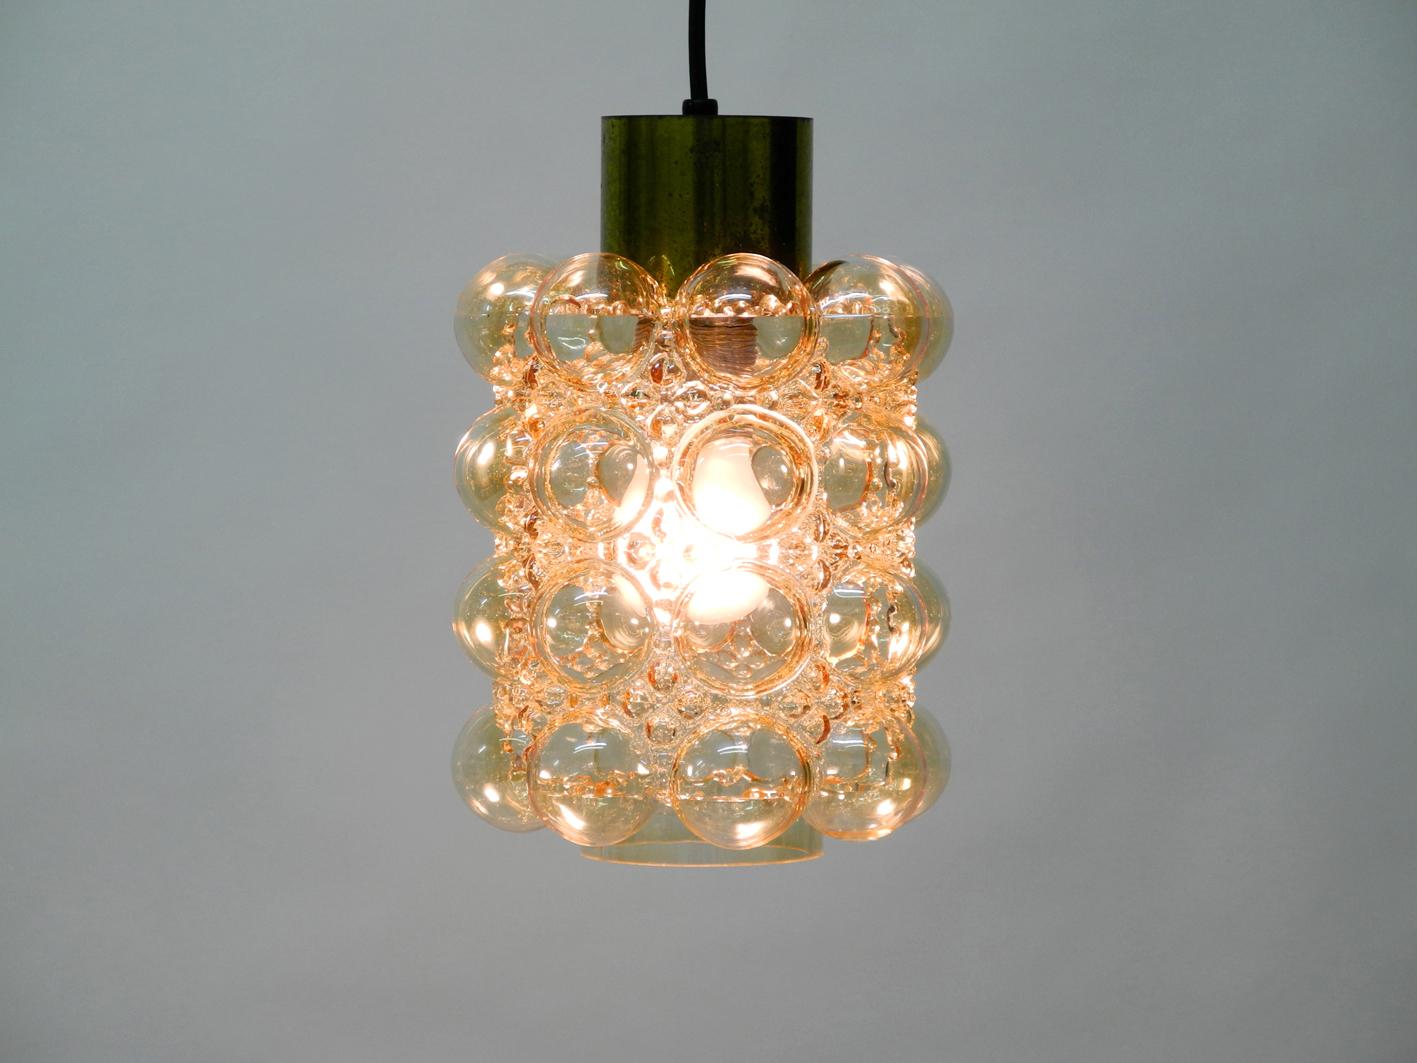 Big and heavy original brass glass bubble pendant lamp from the 1960s.
Manufactured by Limburg, design by Helena Tynell.
Very good vintage condition with little signs of wear and fully functional.
100% original condition without damage and fully